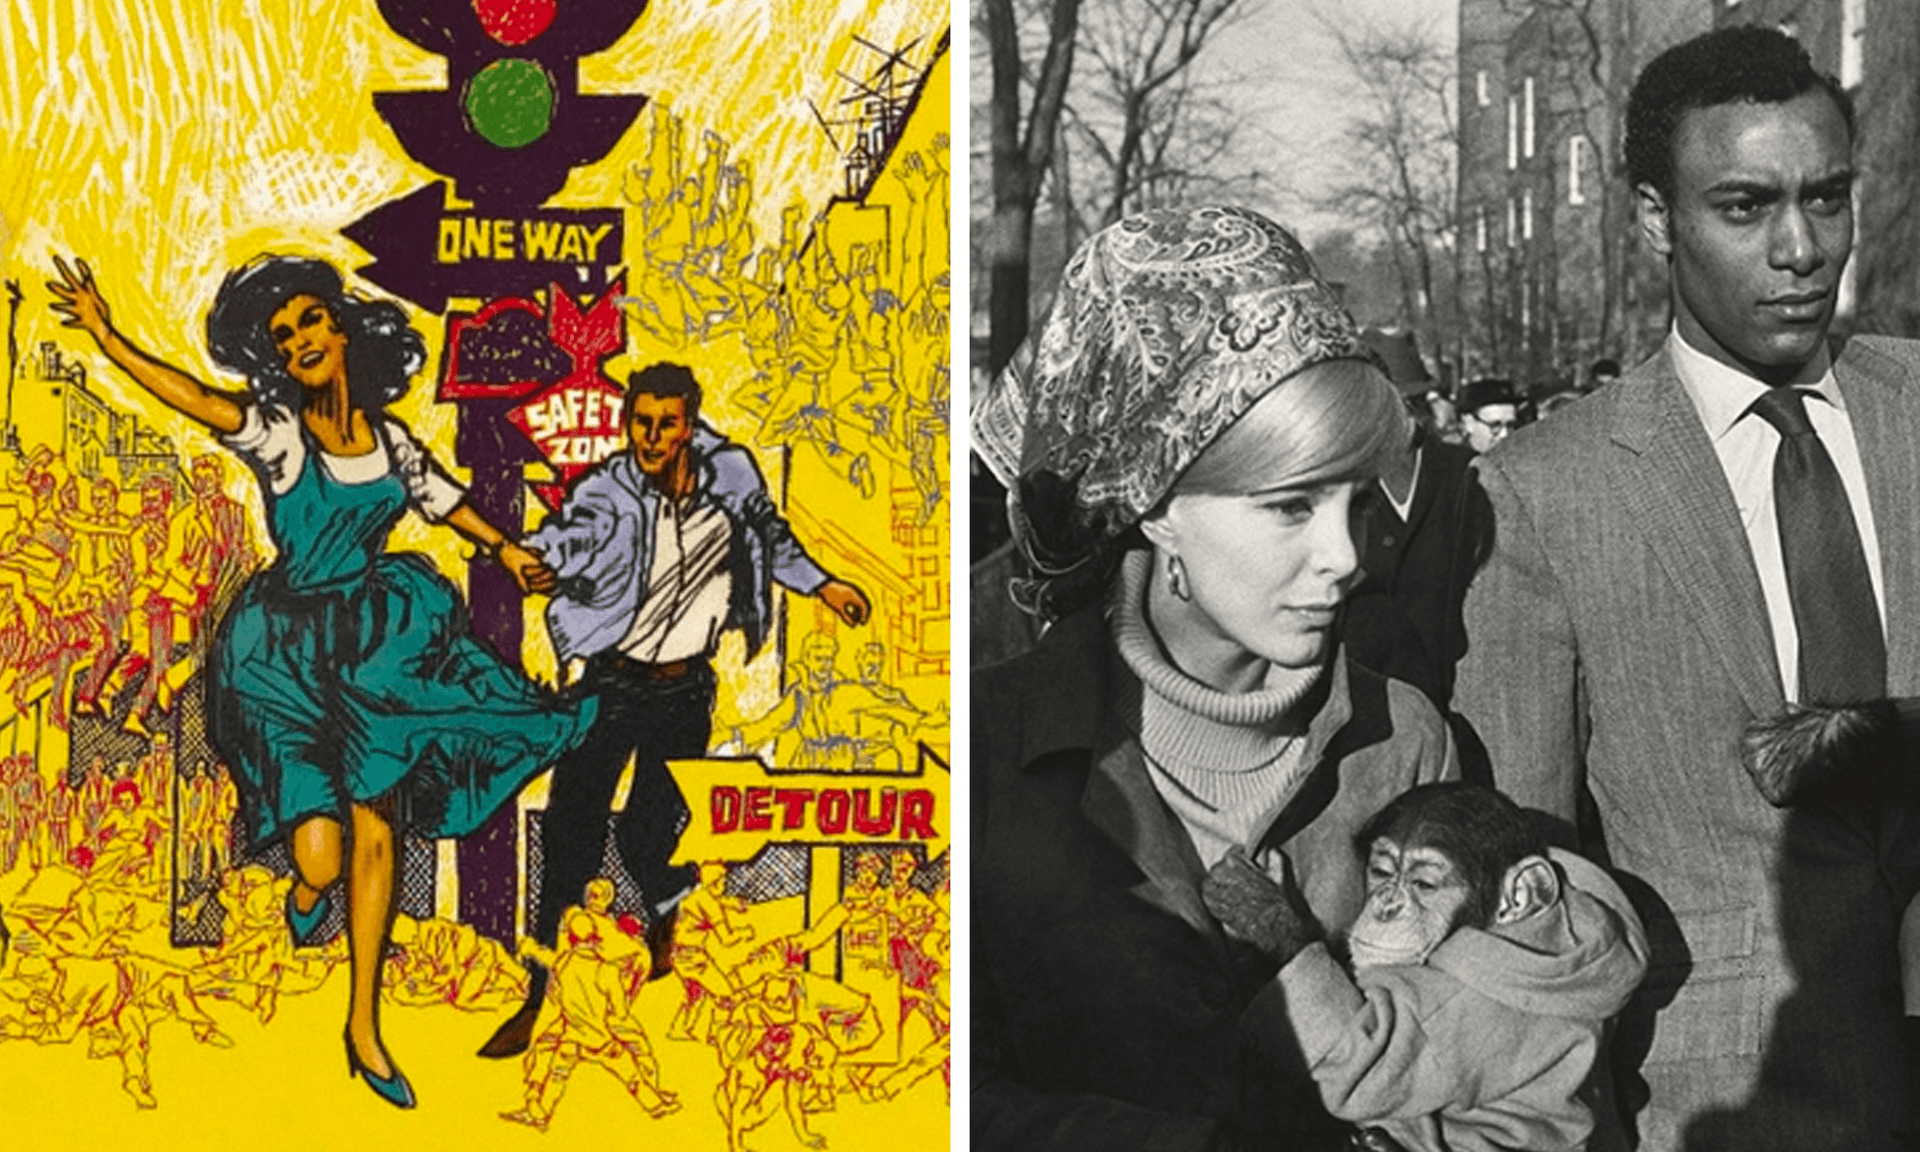 “West Side Story” and Garry Winogrand’s “Central Park Zoo”